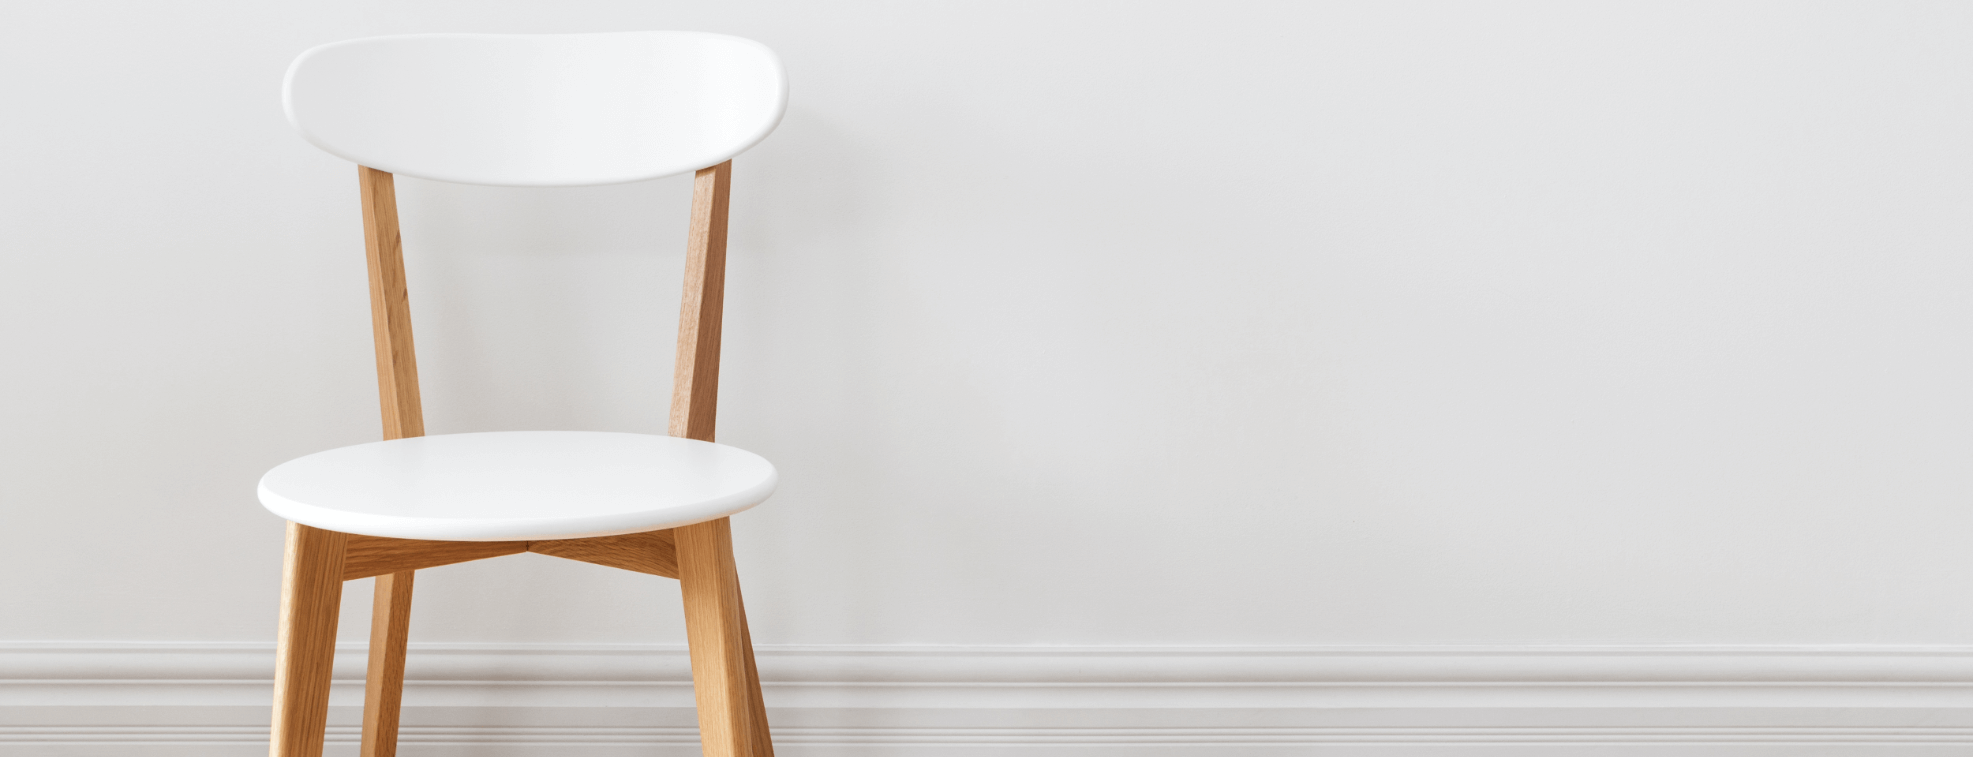 Traditional looking white chair on a white background